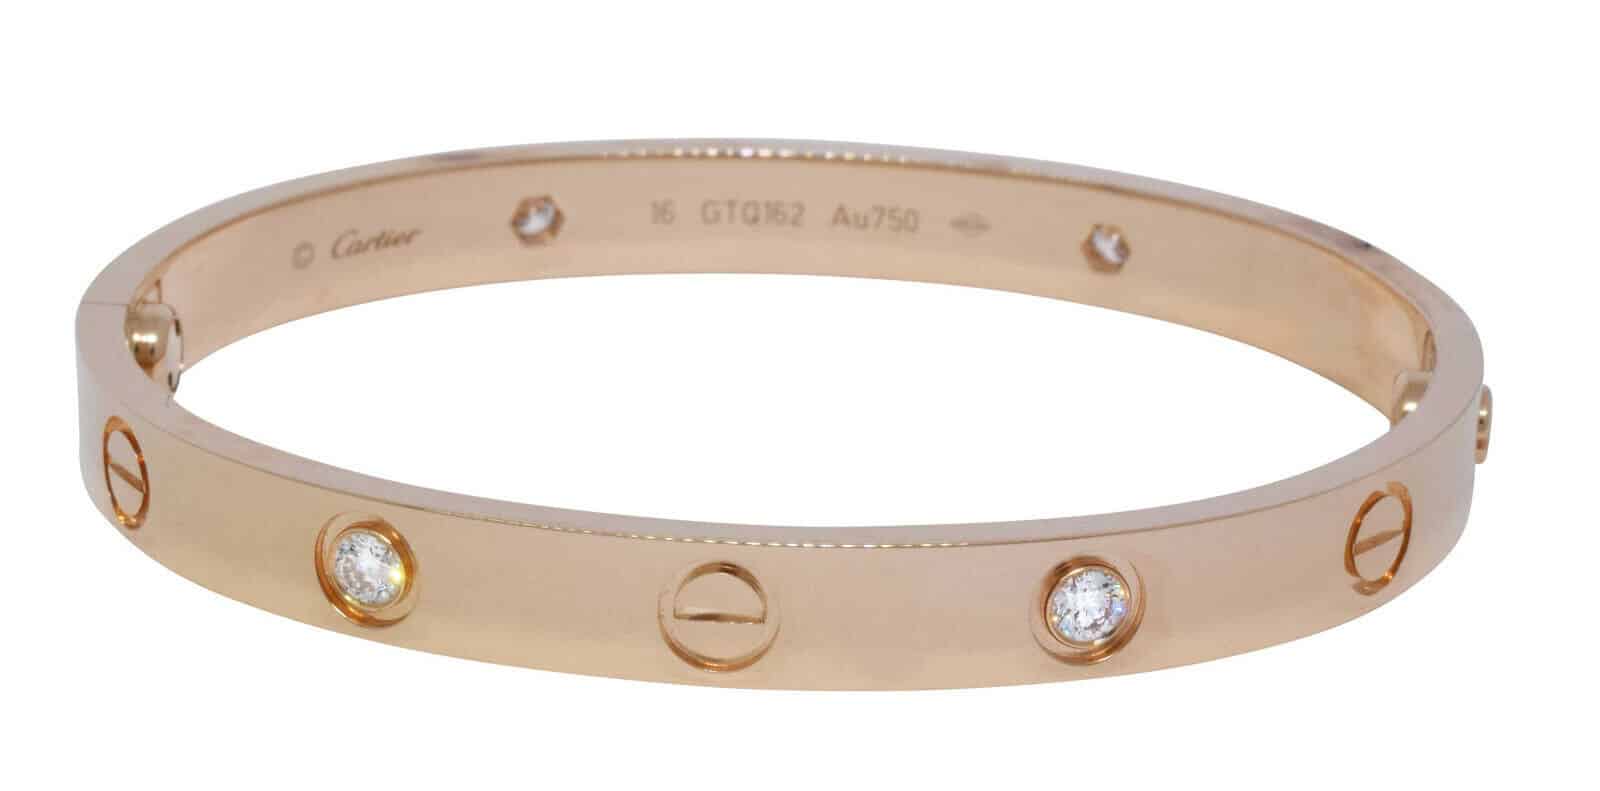 Cartier Love Bracelet Size 15 vs 16: Which one should you buy? 